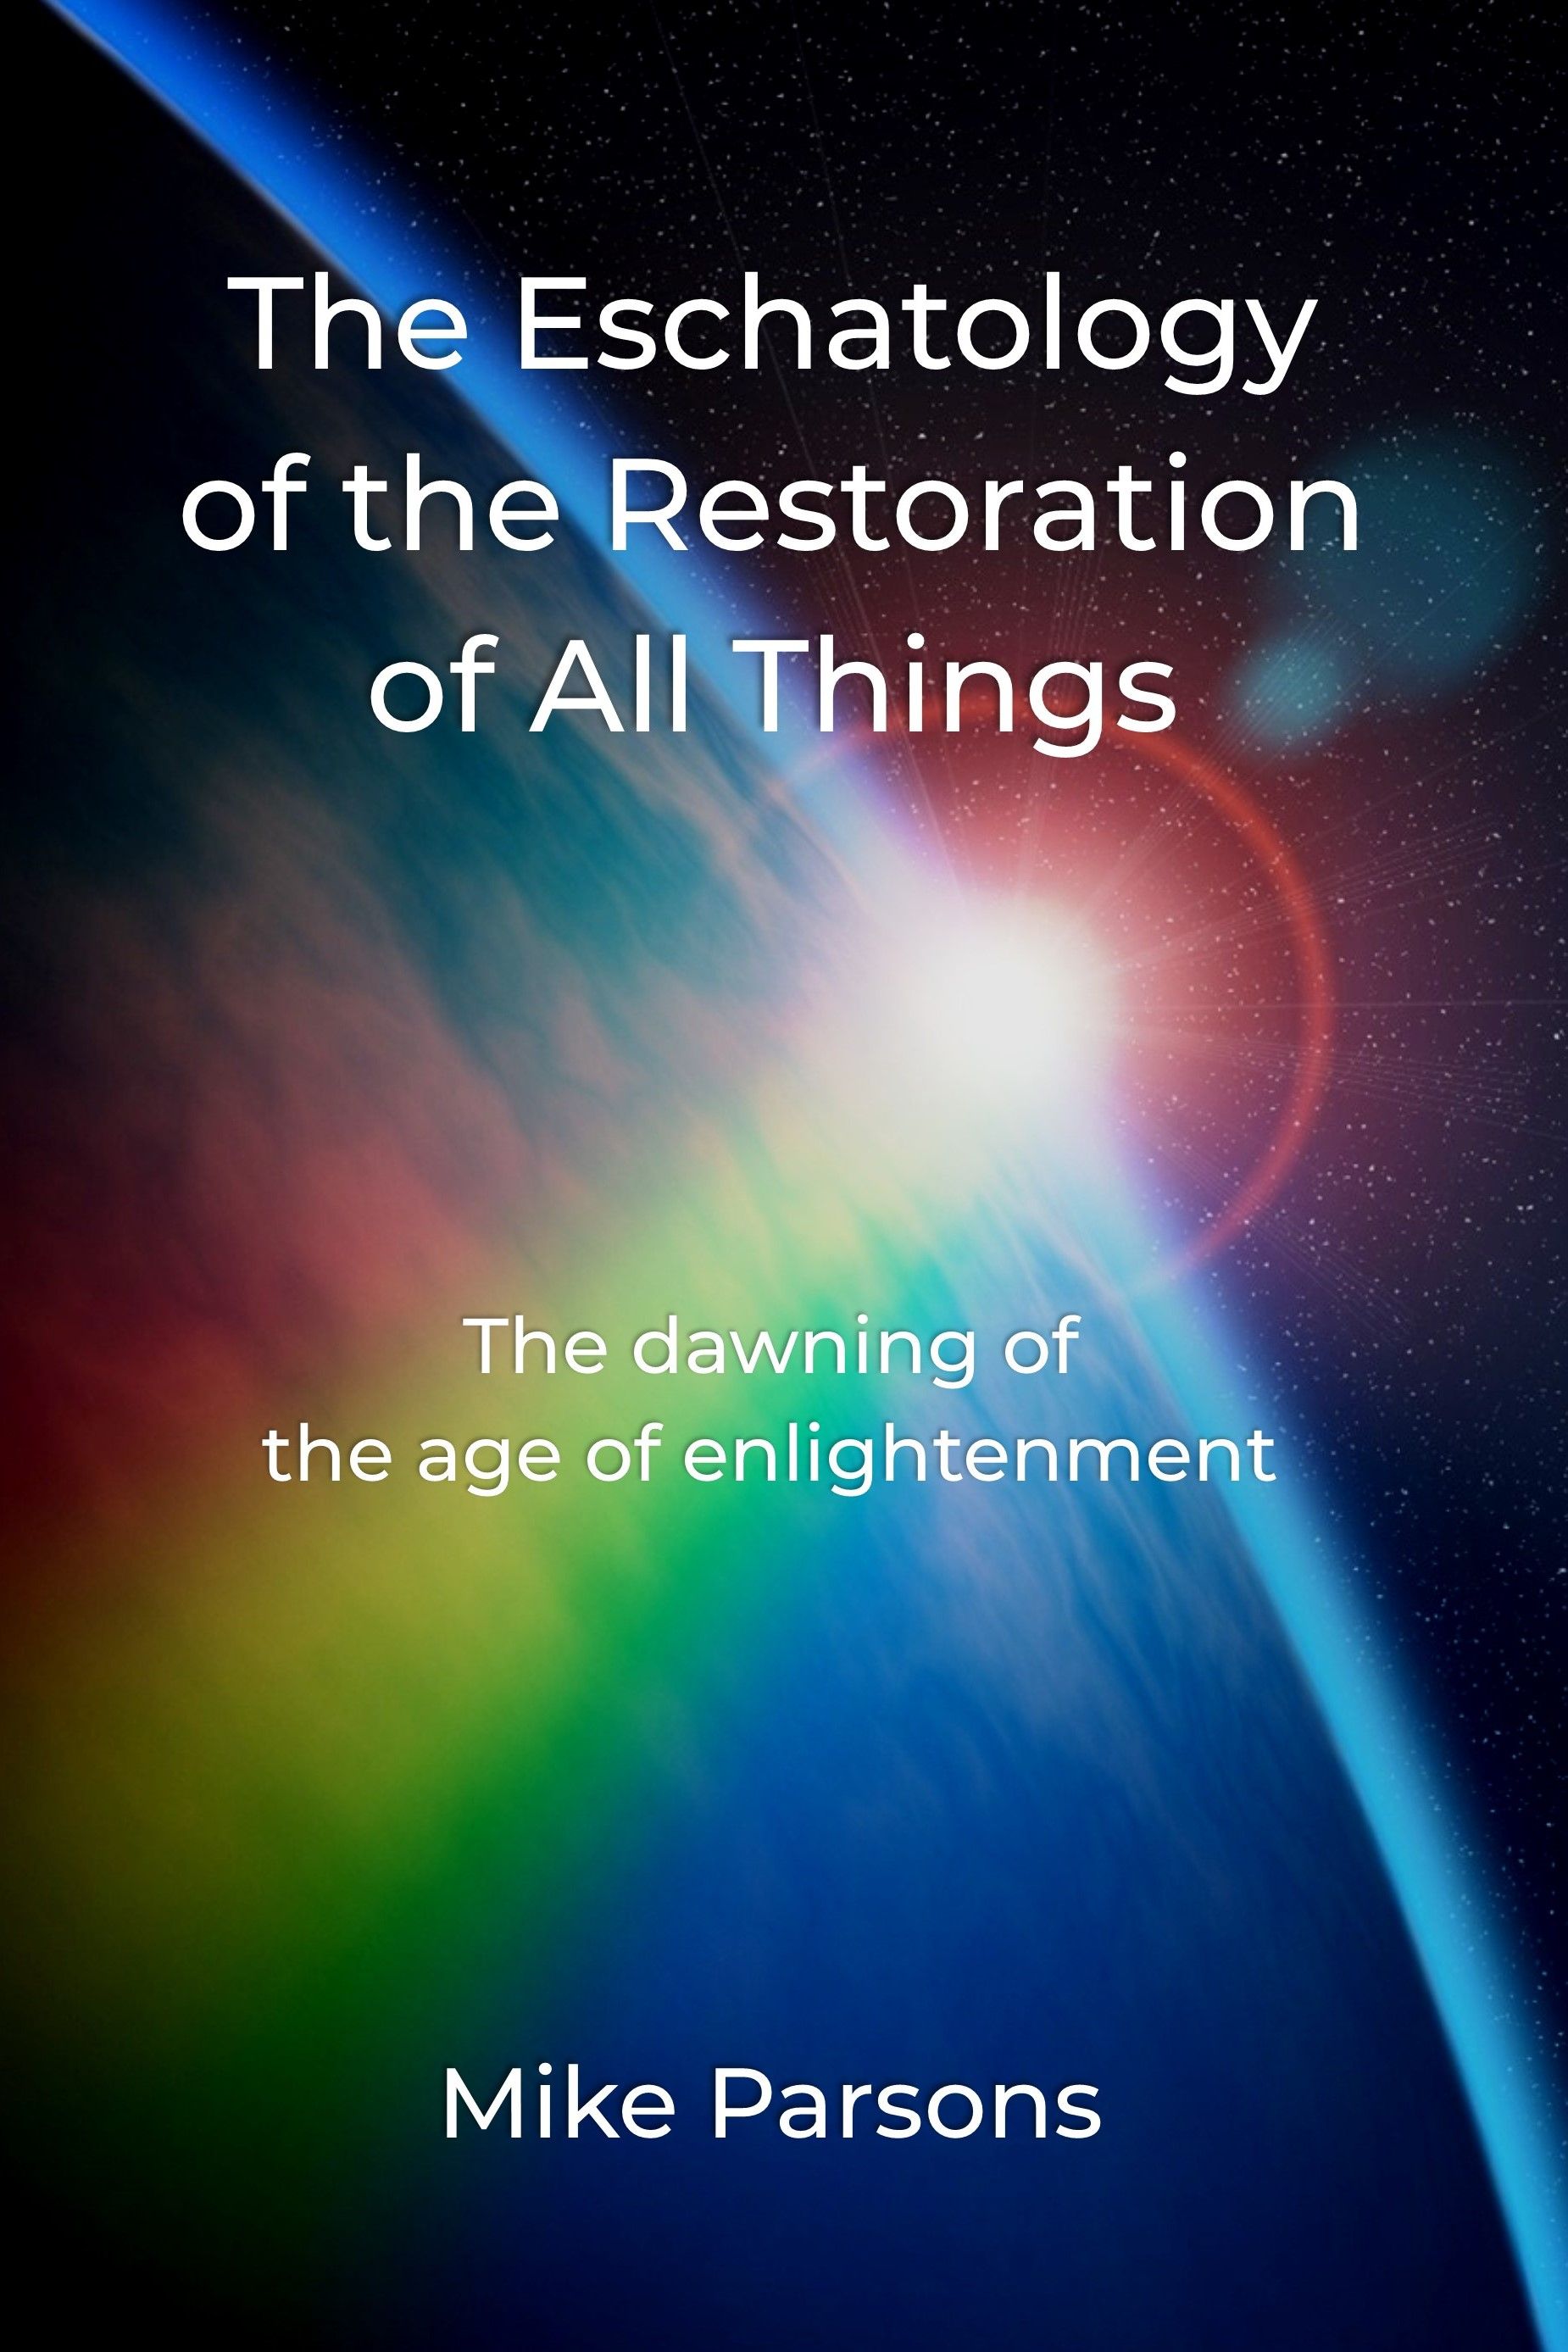 Cover image of The Restoration of All Things book by Mike Parsons